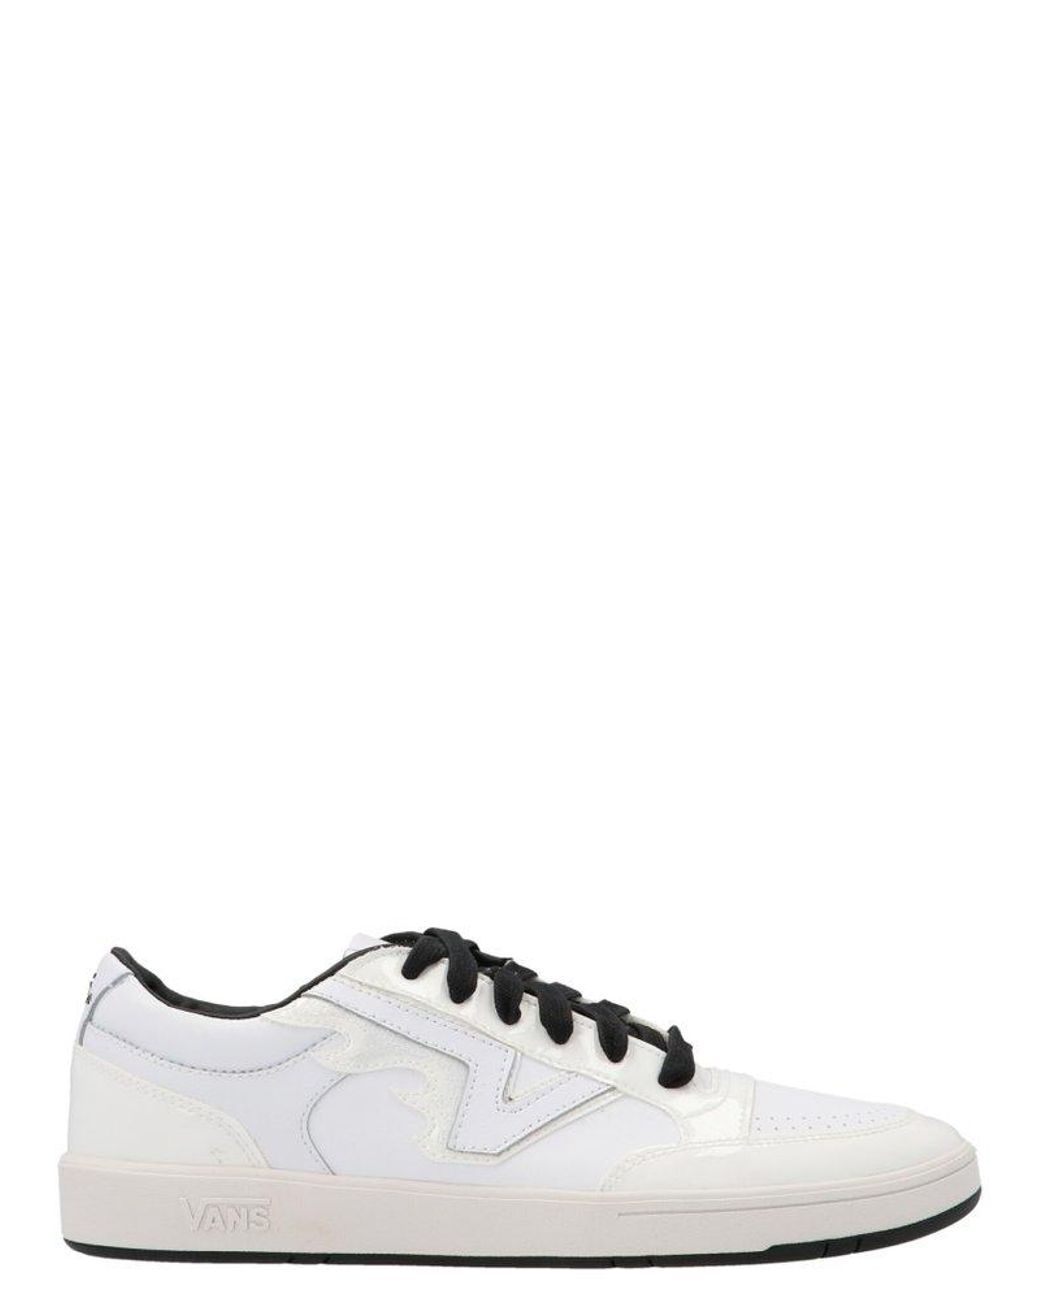 Vans Lowland Cc Ft Flamez Shoes in White for Men - Save 22% | Lyst